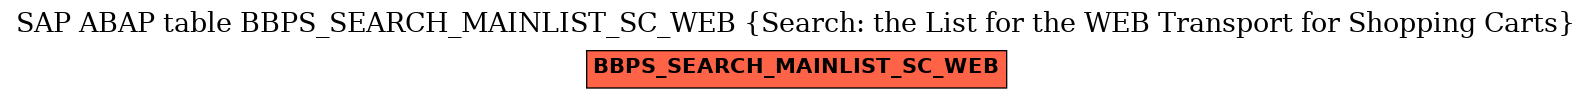 E-R Diagram for table BBPS_SEARCH_MAINLIST_SC_WEB (Search: the List for the WEB Transport for Shopping Carts)